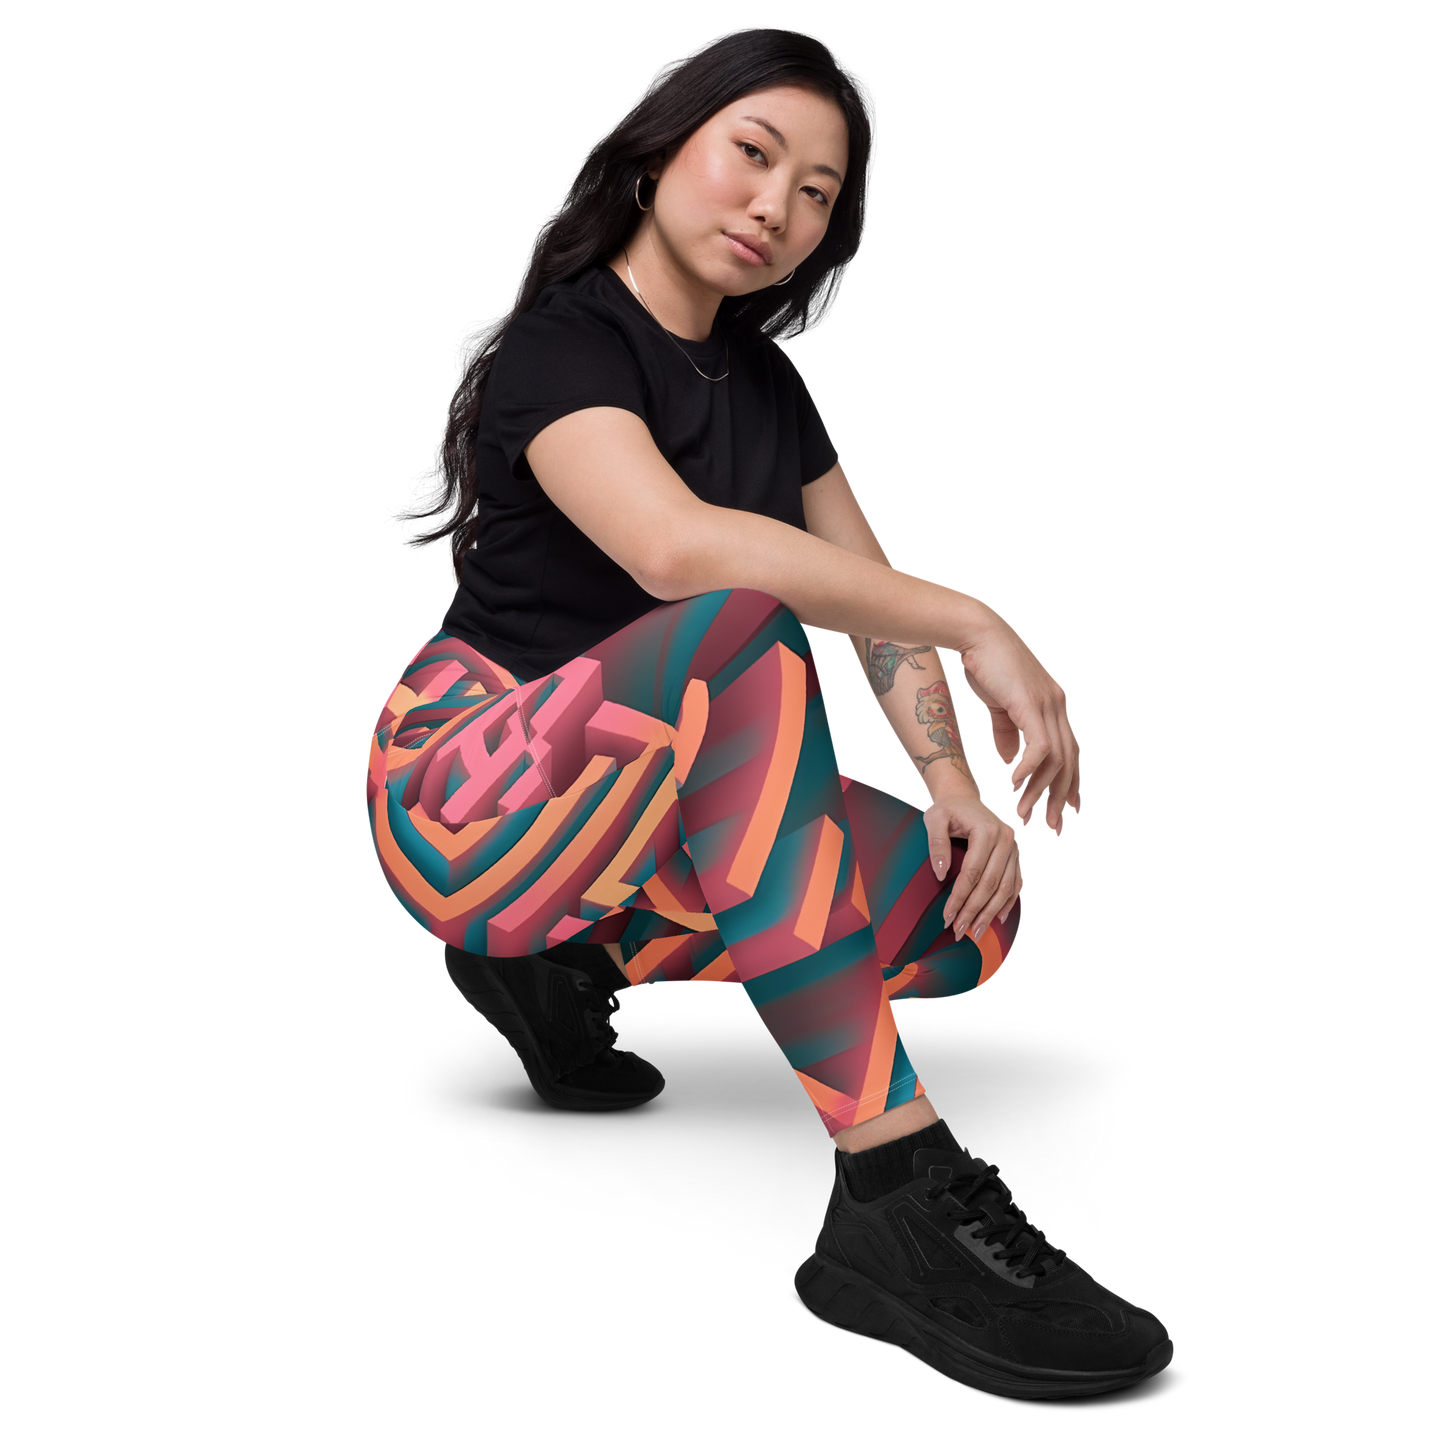 3D Maze Illusion | 3D Patterns | All-Over Print Leggings with Pockets - #1